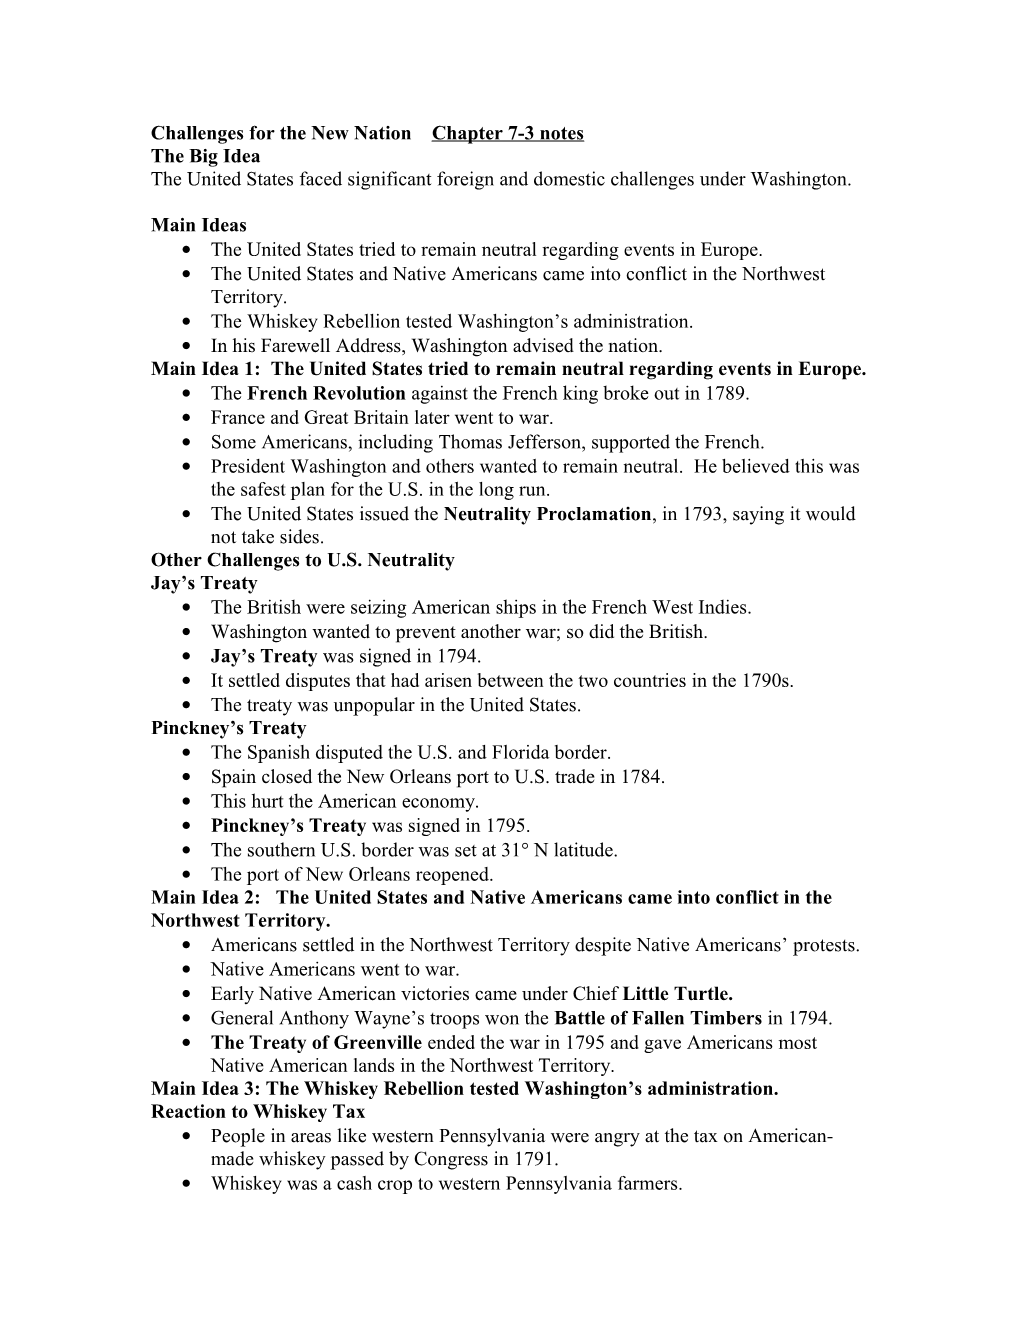 Challenges for the New Nation Chapter 7-3 Notes